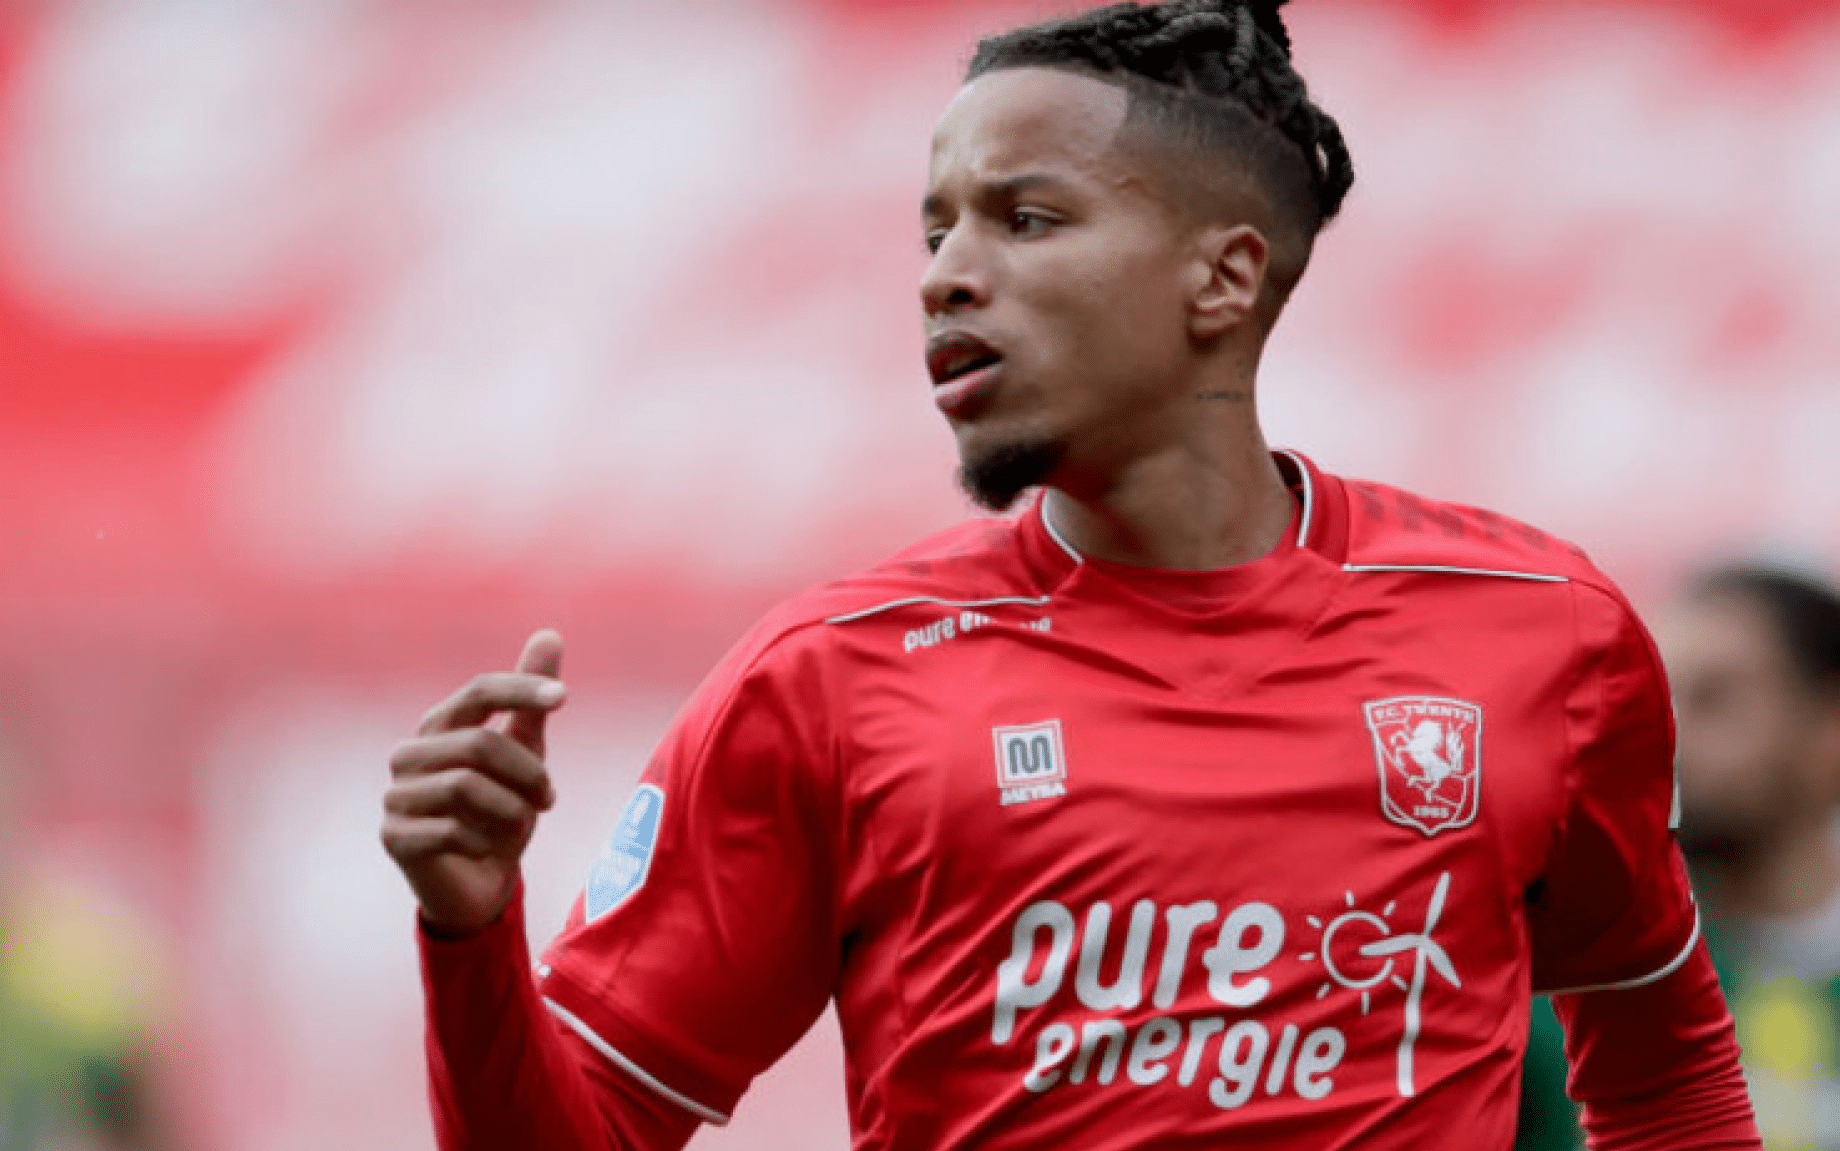 Nigeria Super Eagles Right Back Ebuehi Joins Newly Promoted Serie A side Venezia From Benfica